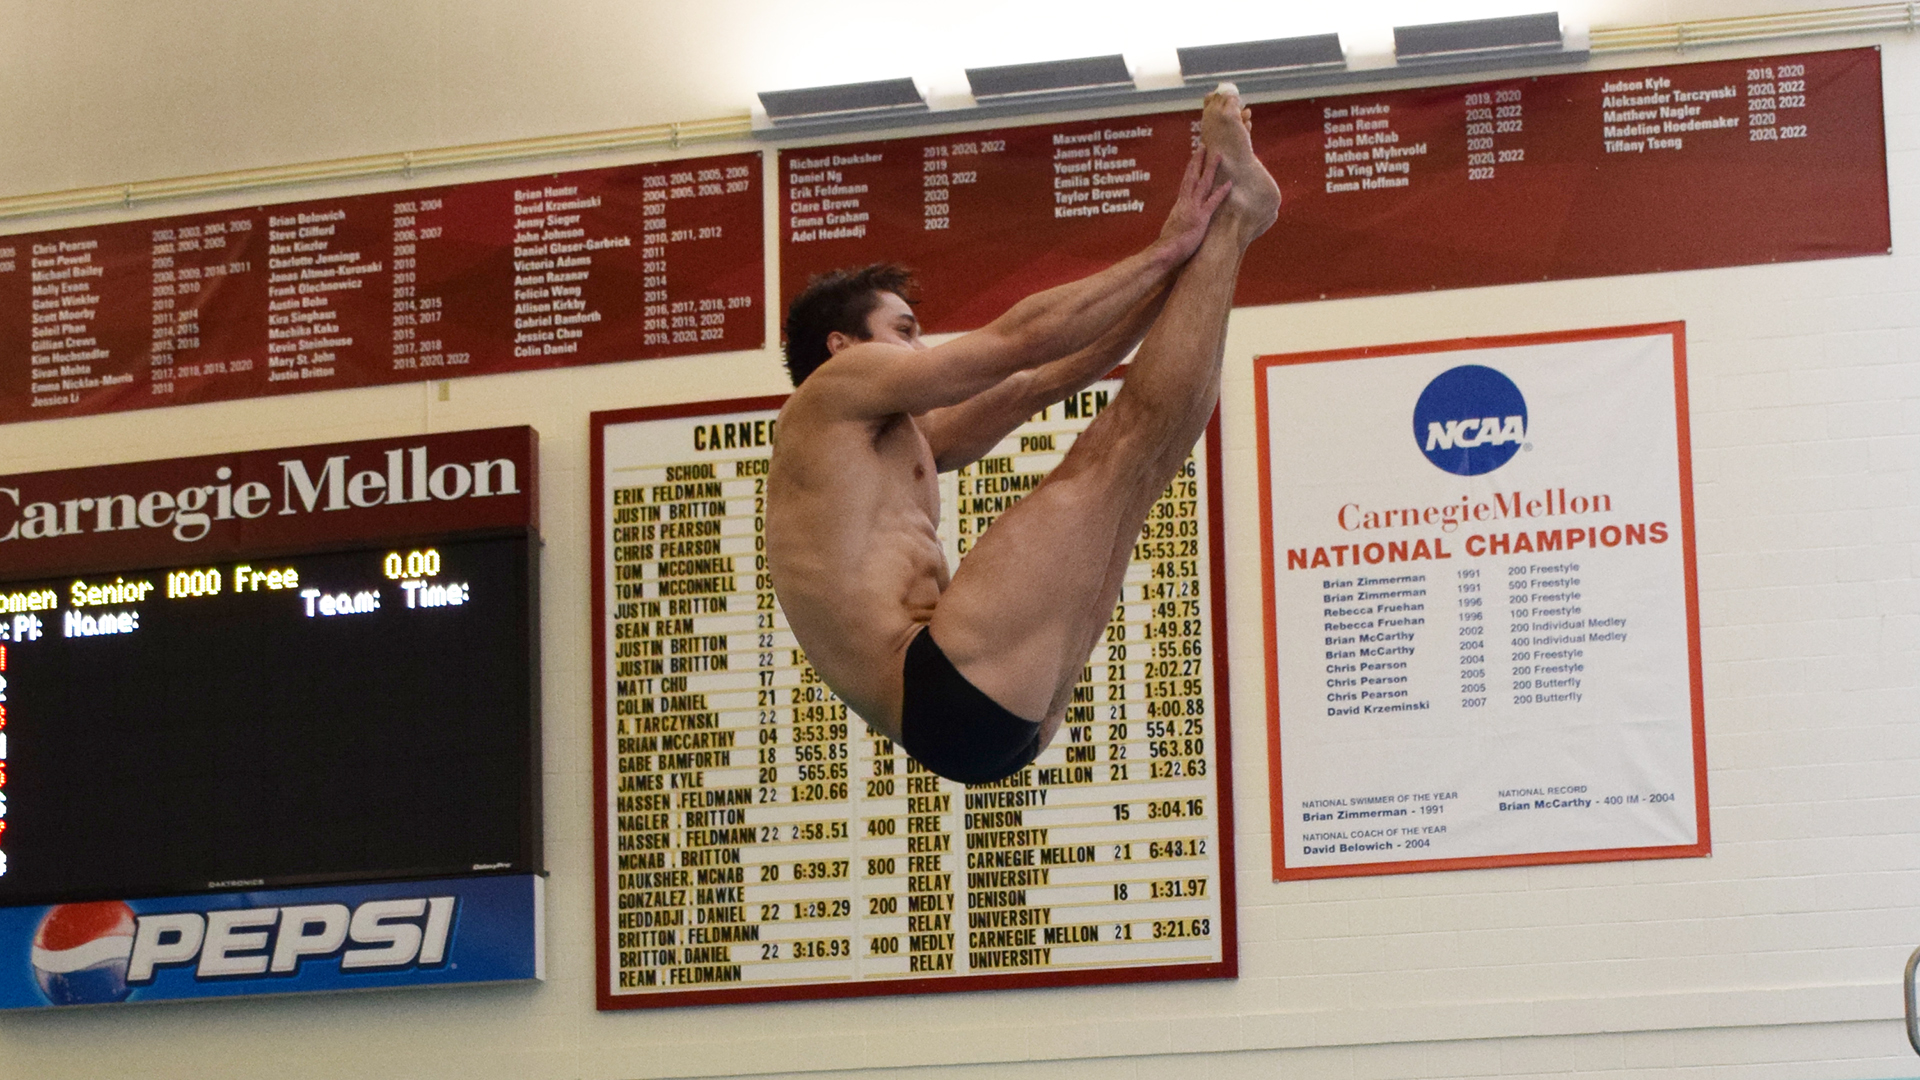 men's diver touching toes in air